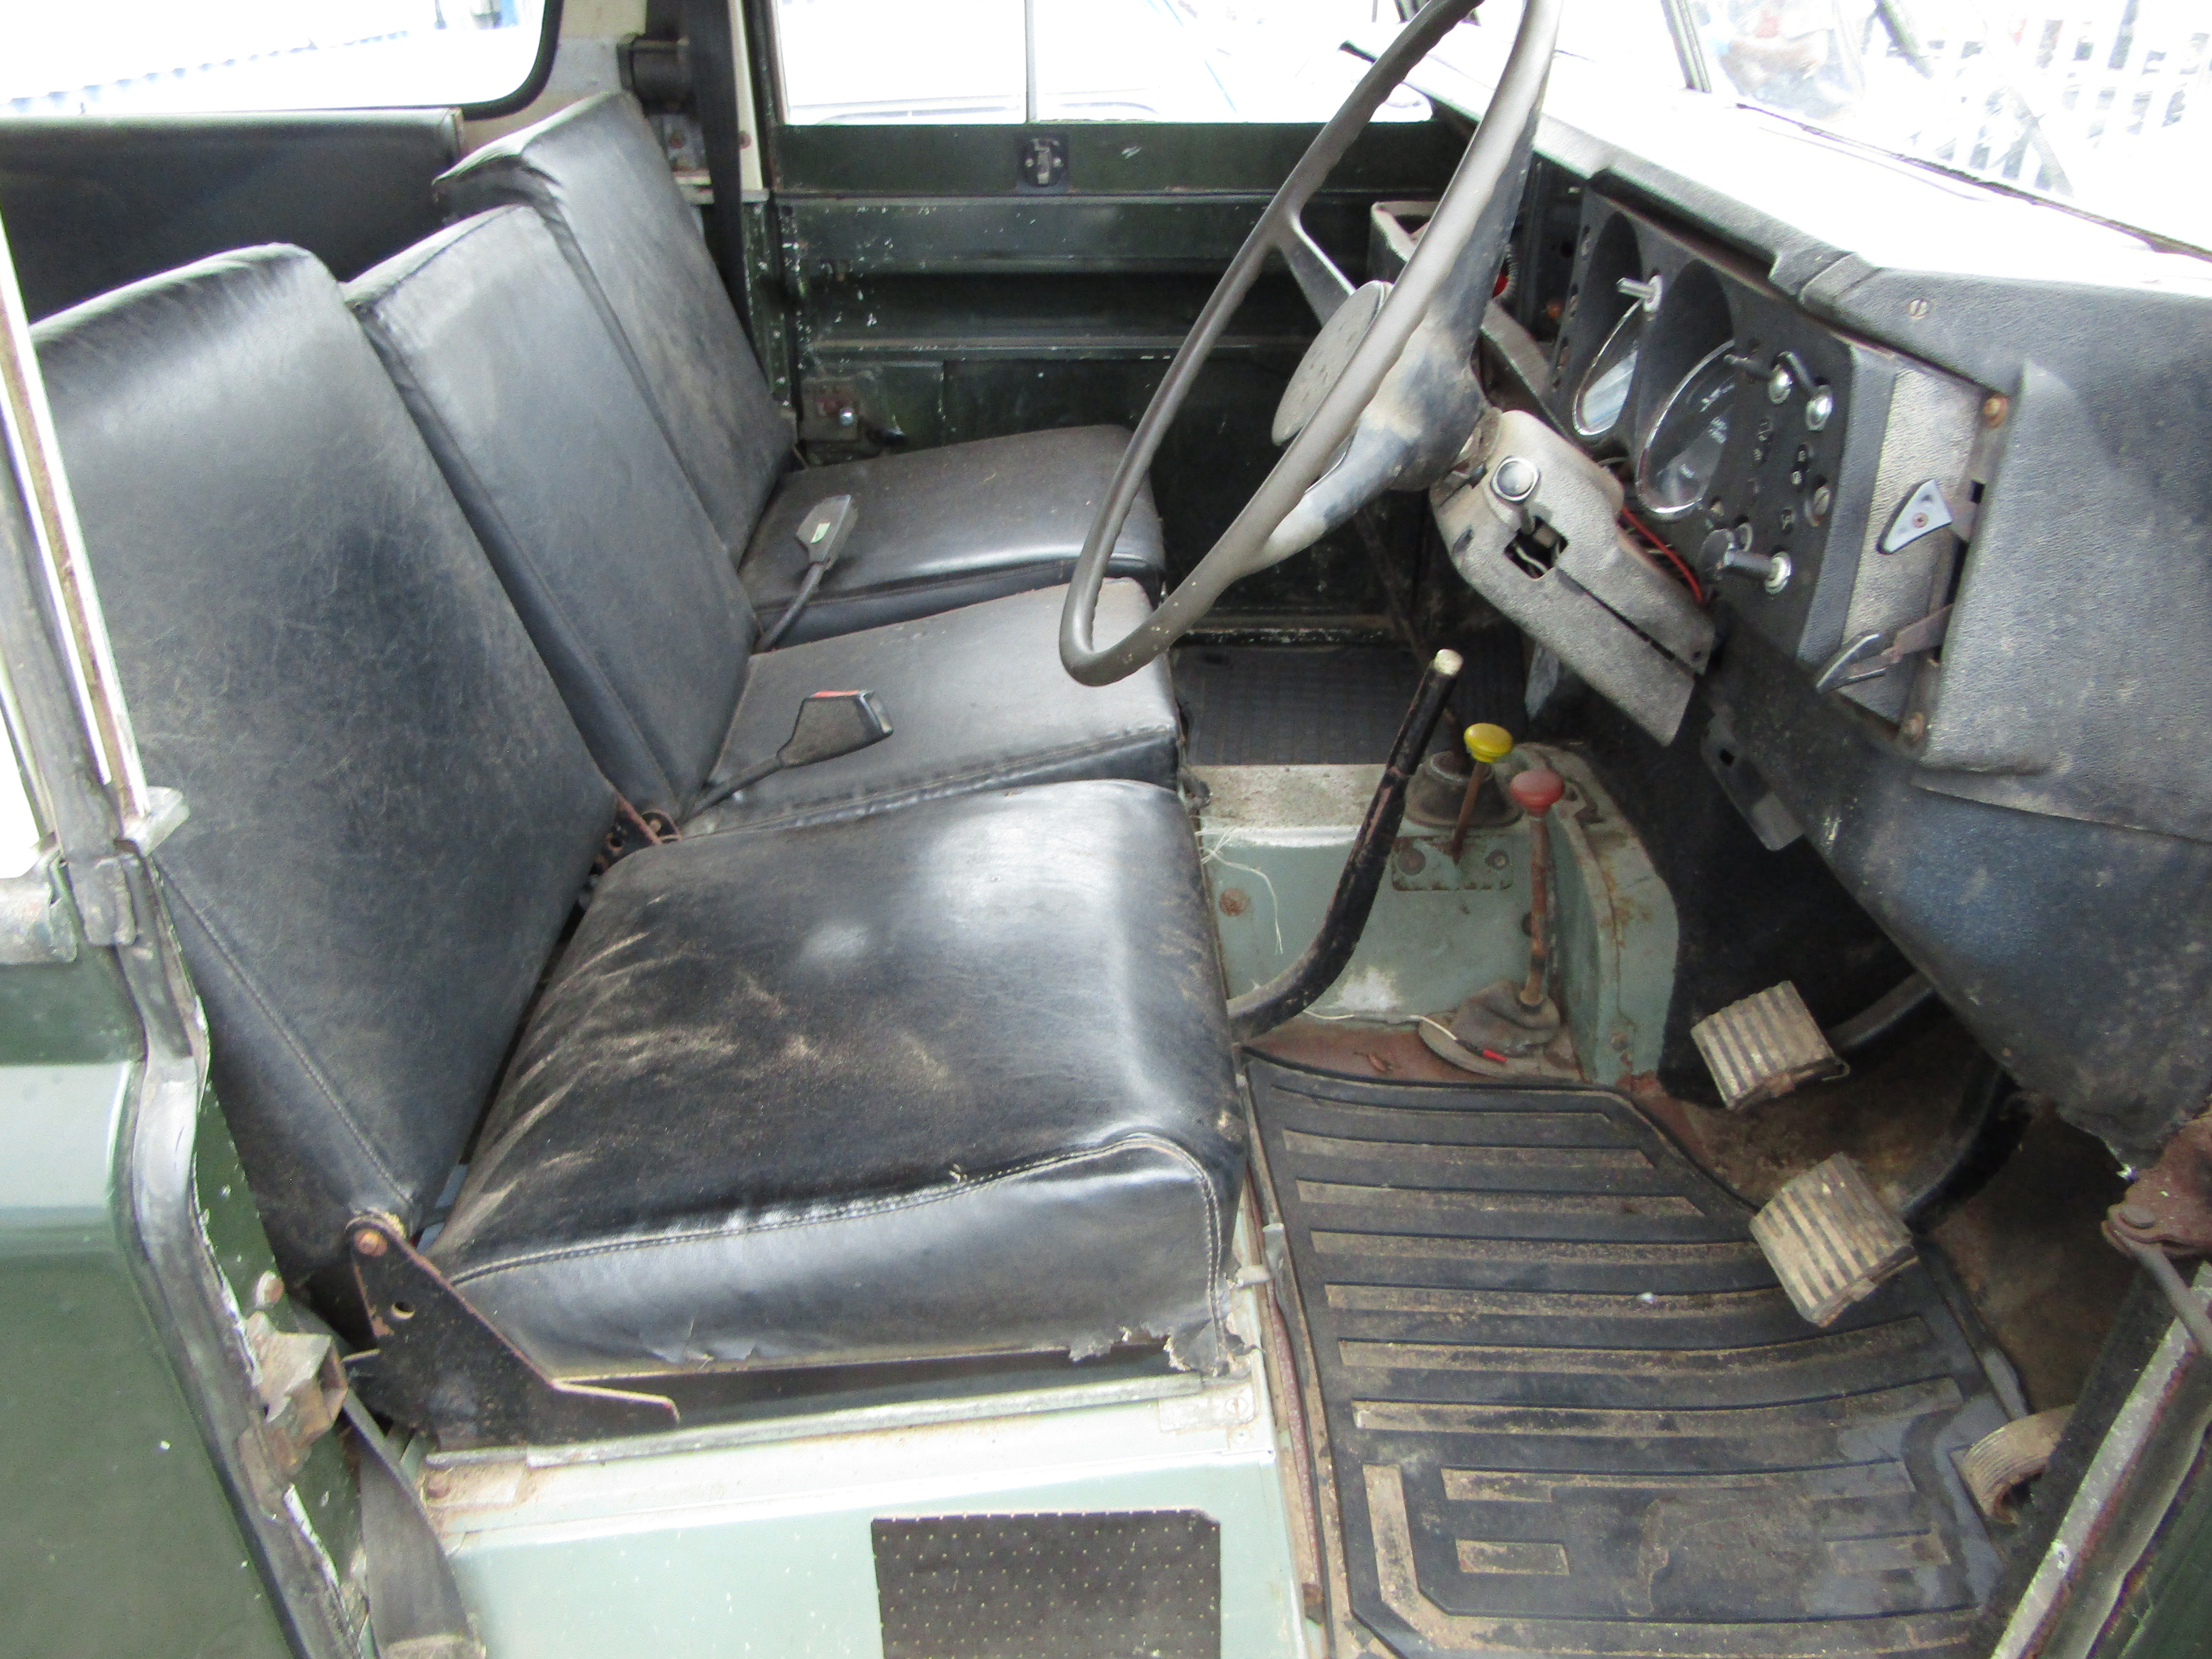 1981 Land Rover Series 3 SWB - Image 13 of 20